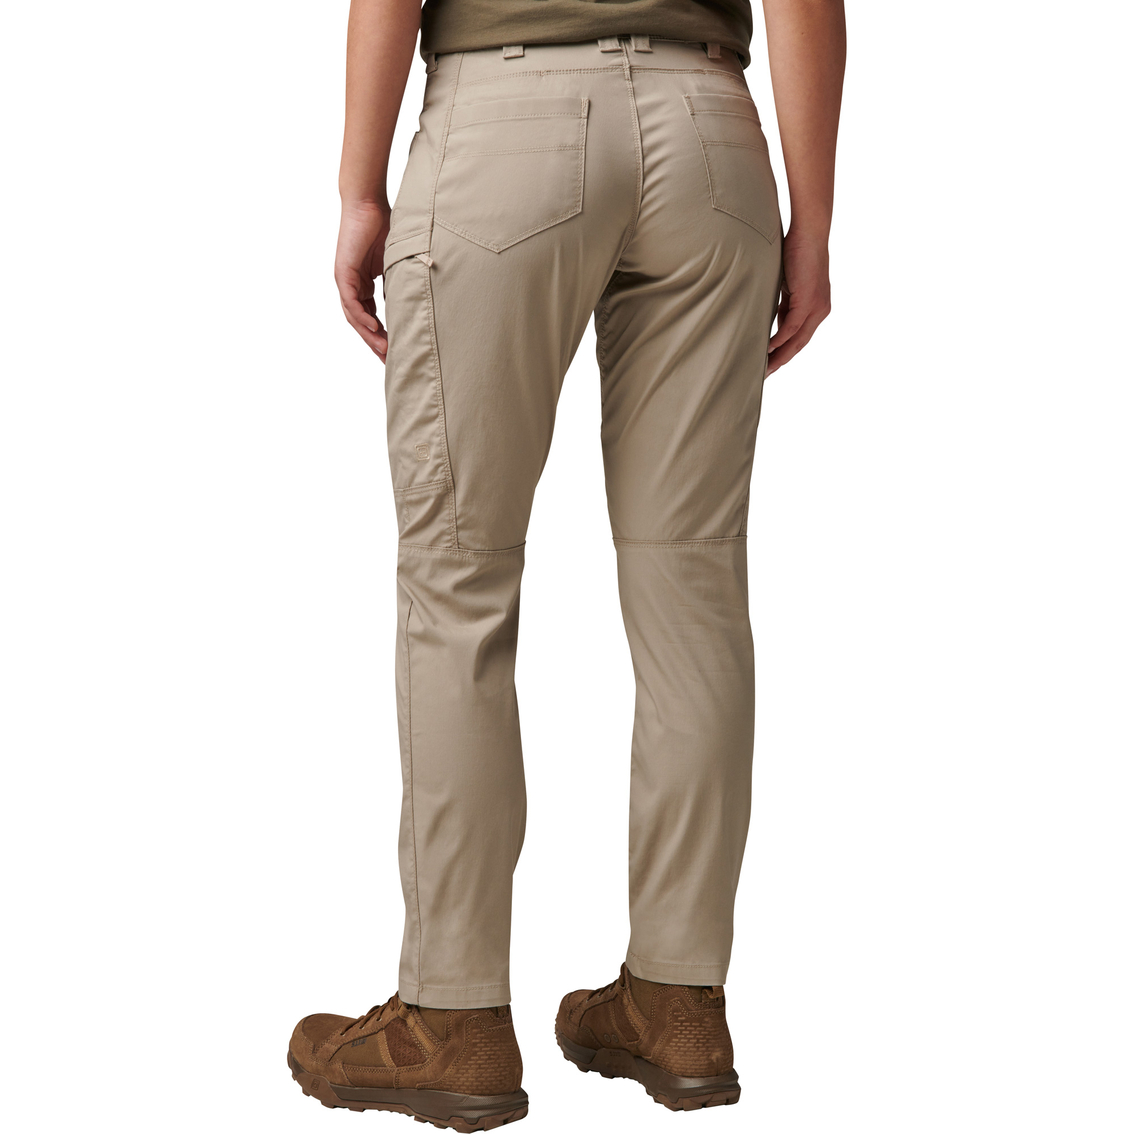 5.11 Spire Pants - Image 3 of 4